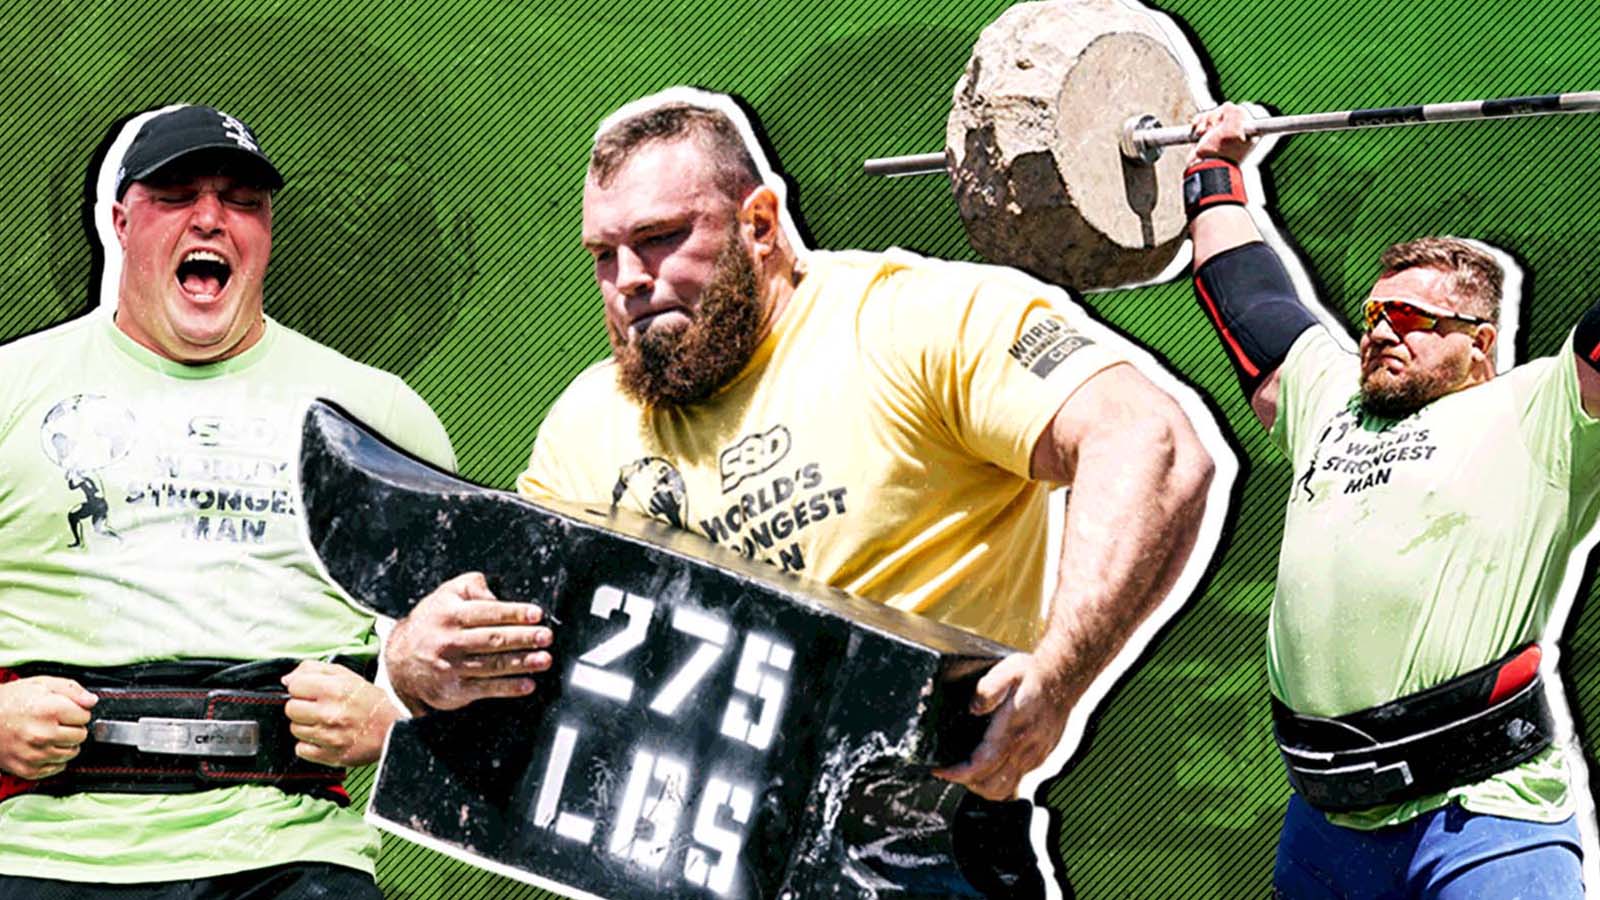 2023 World's Strongest Man and Leaderboard